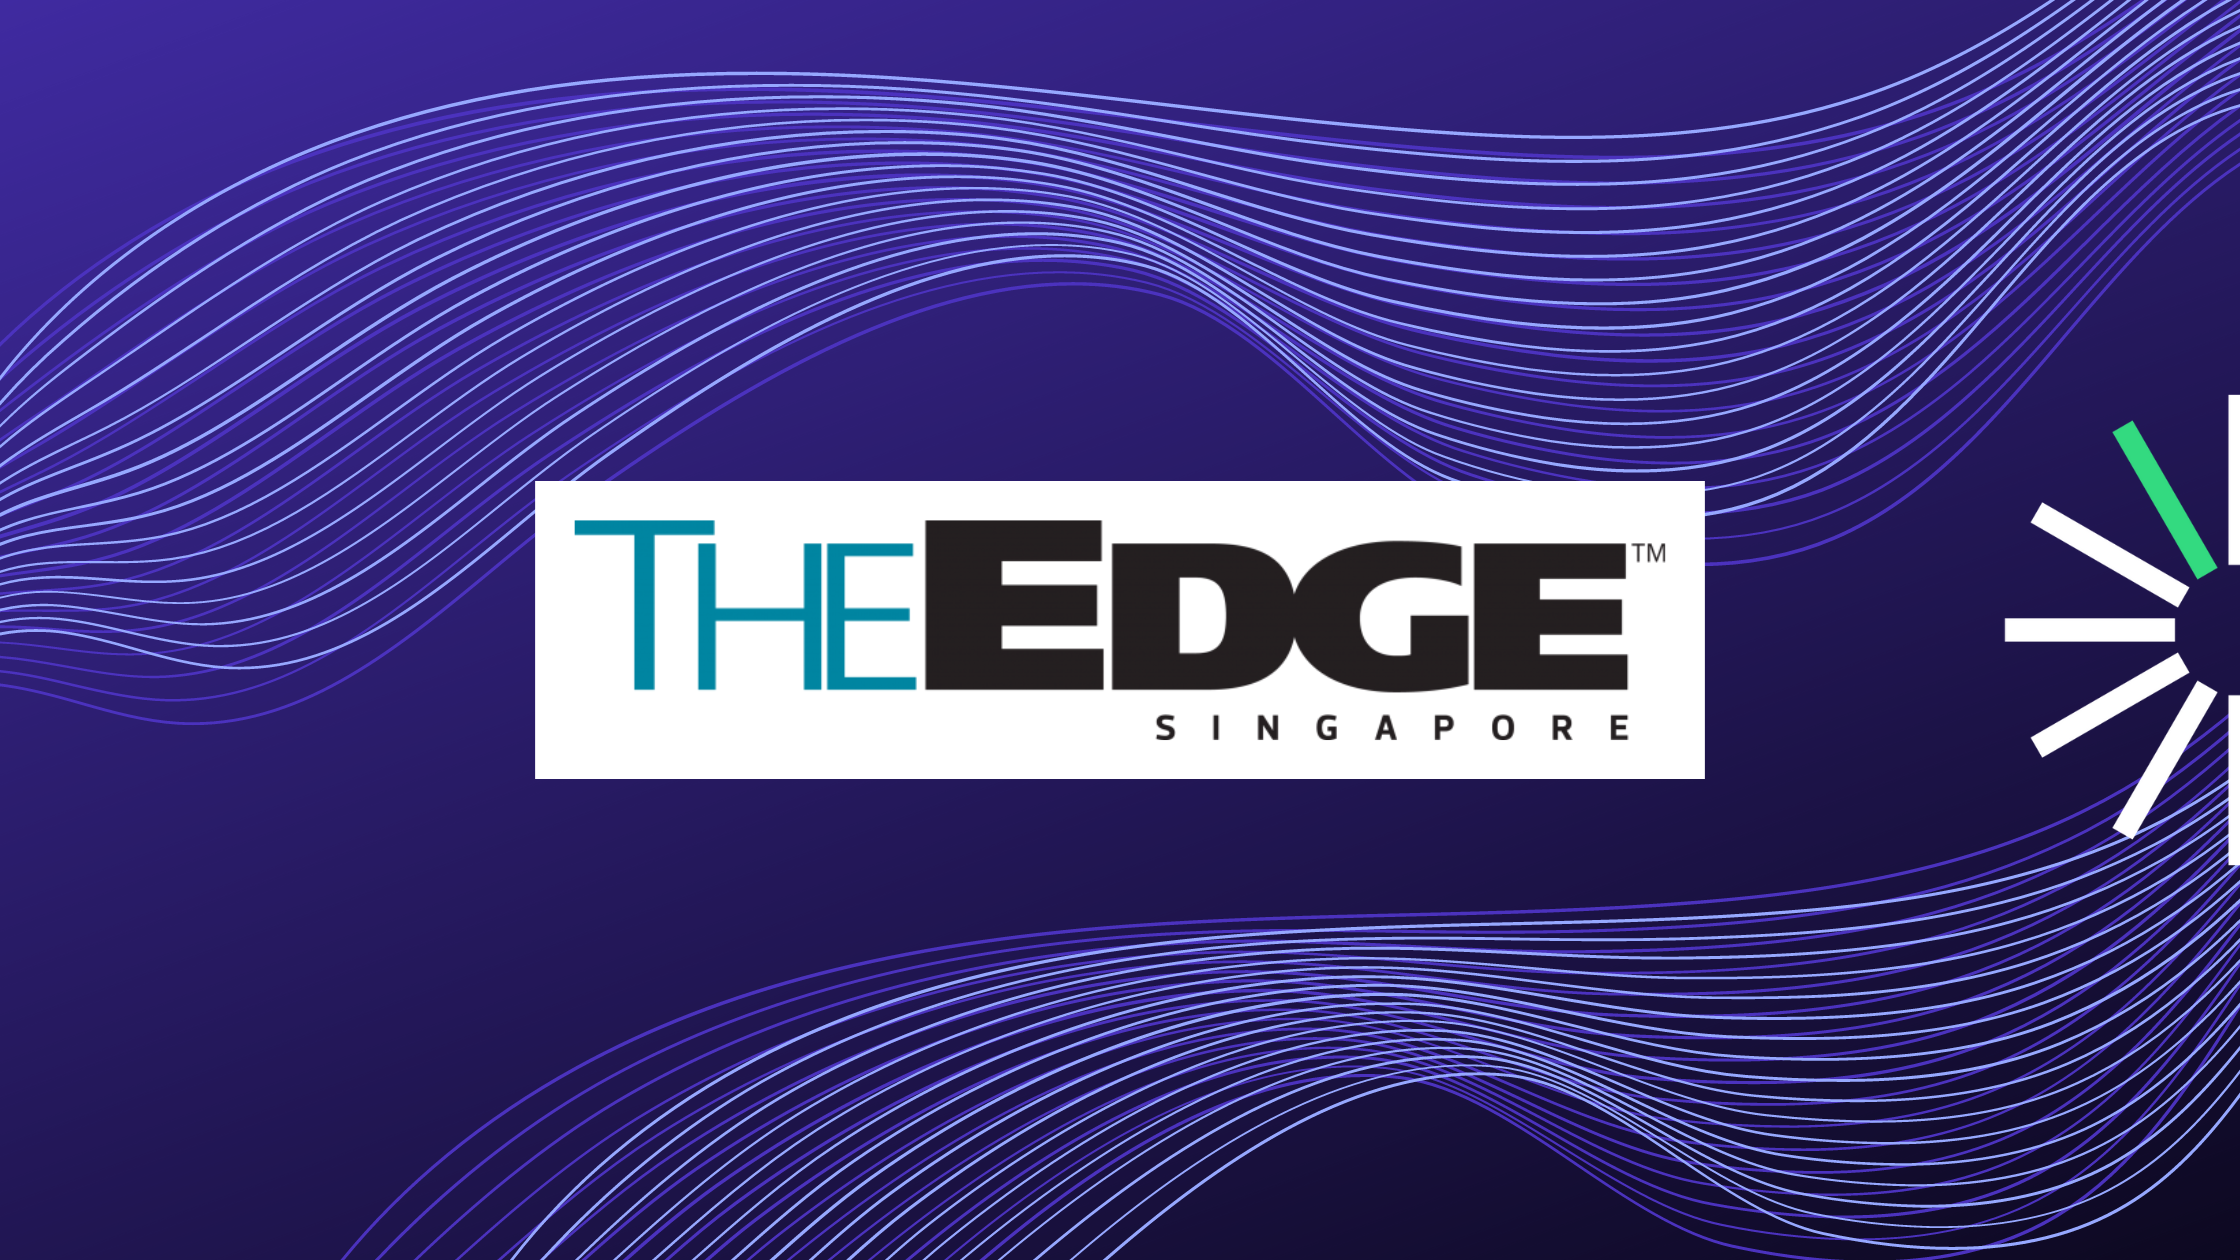 TheEdge - RealVantage names former ARA asset management's deputy group CEO as chairman